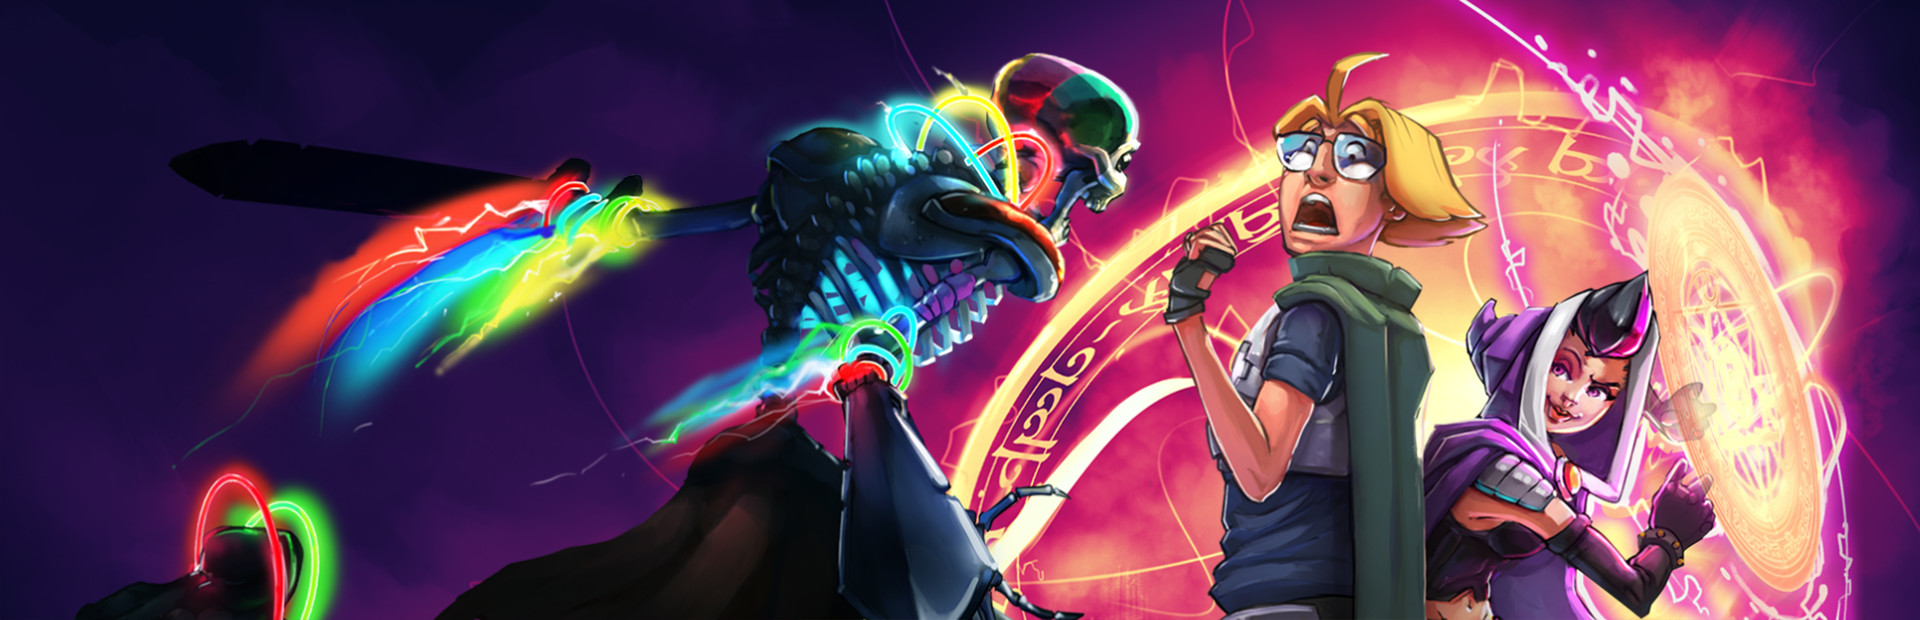 The Metronomicon: Slay The Dance Floor cover image